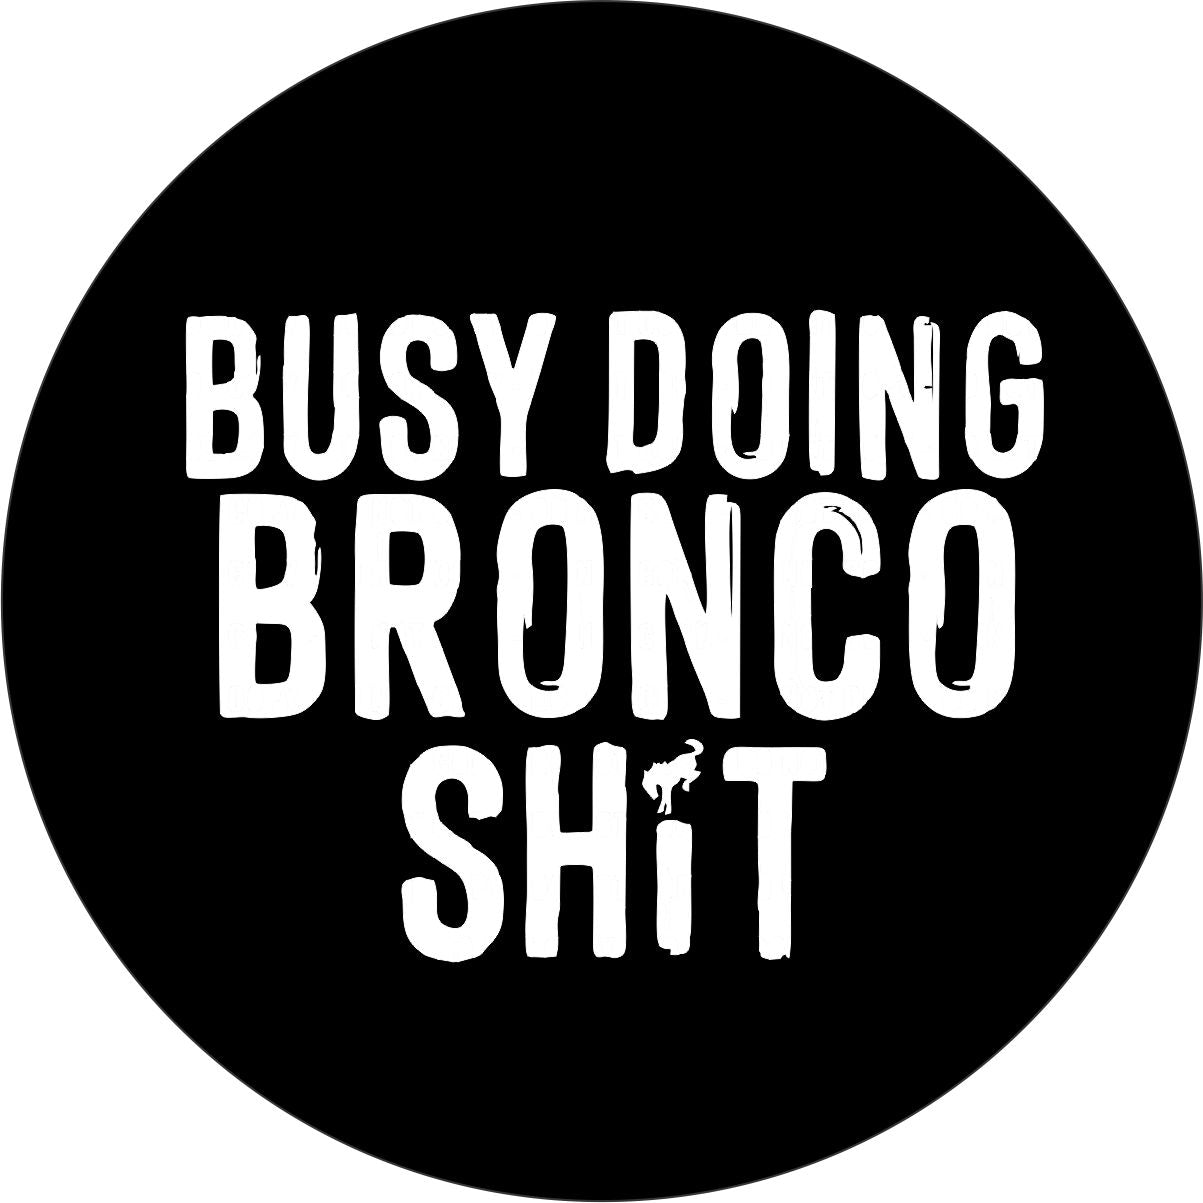 Black vinyl spare tire cover that boldy says "busy doing Bronco shit" and the dot in the I is a Bronco horse icon.